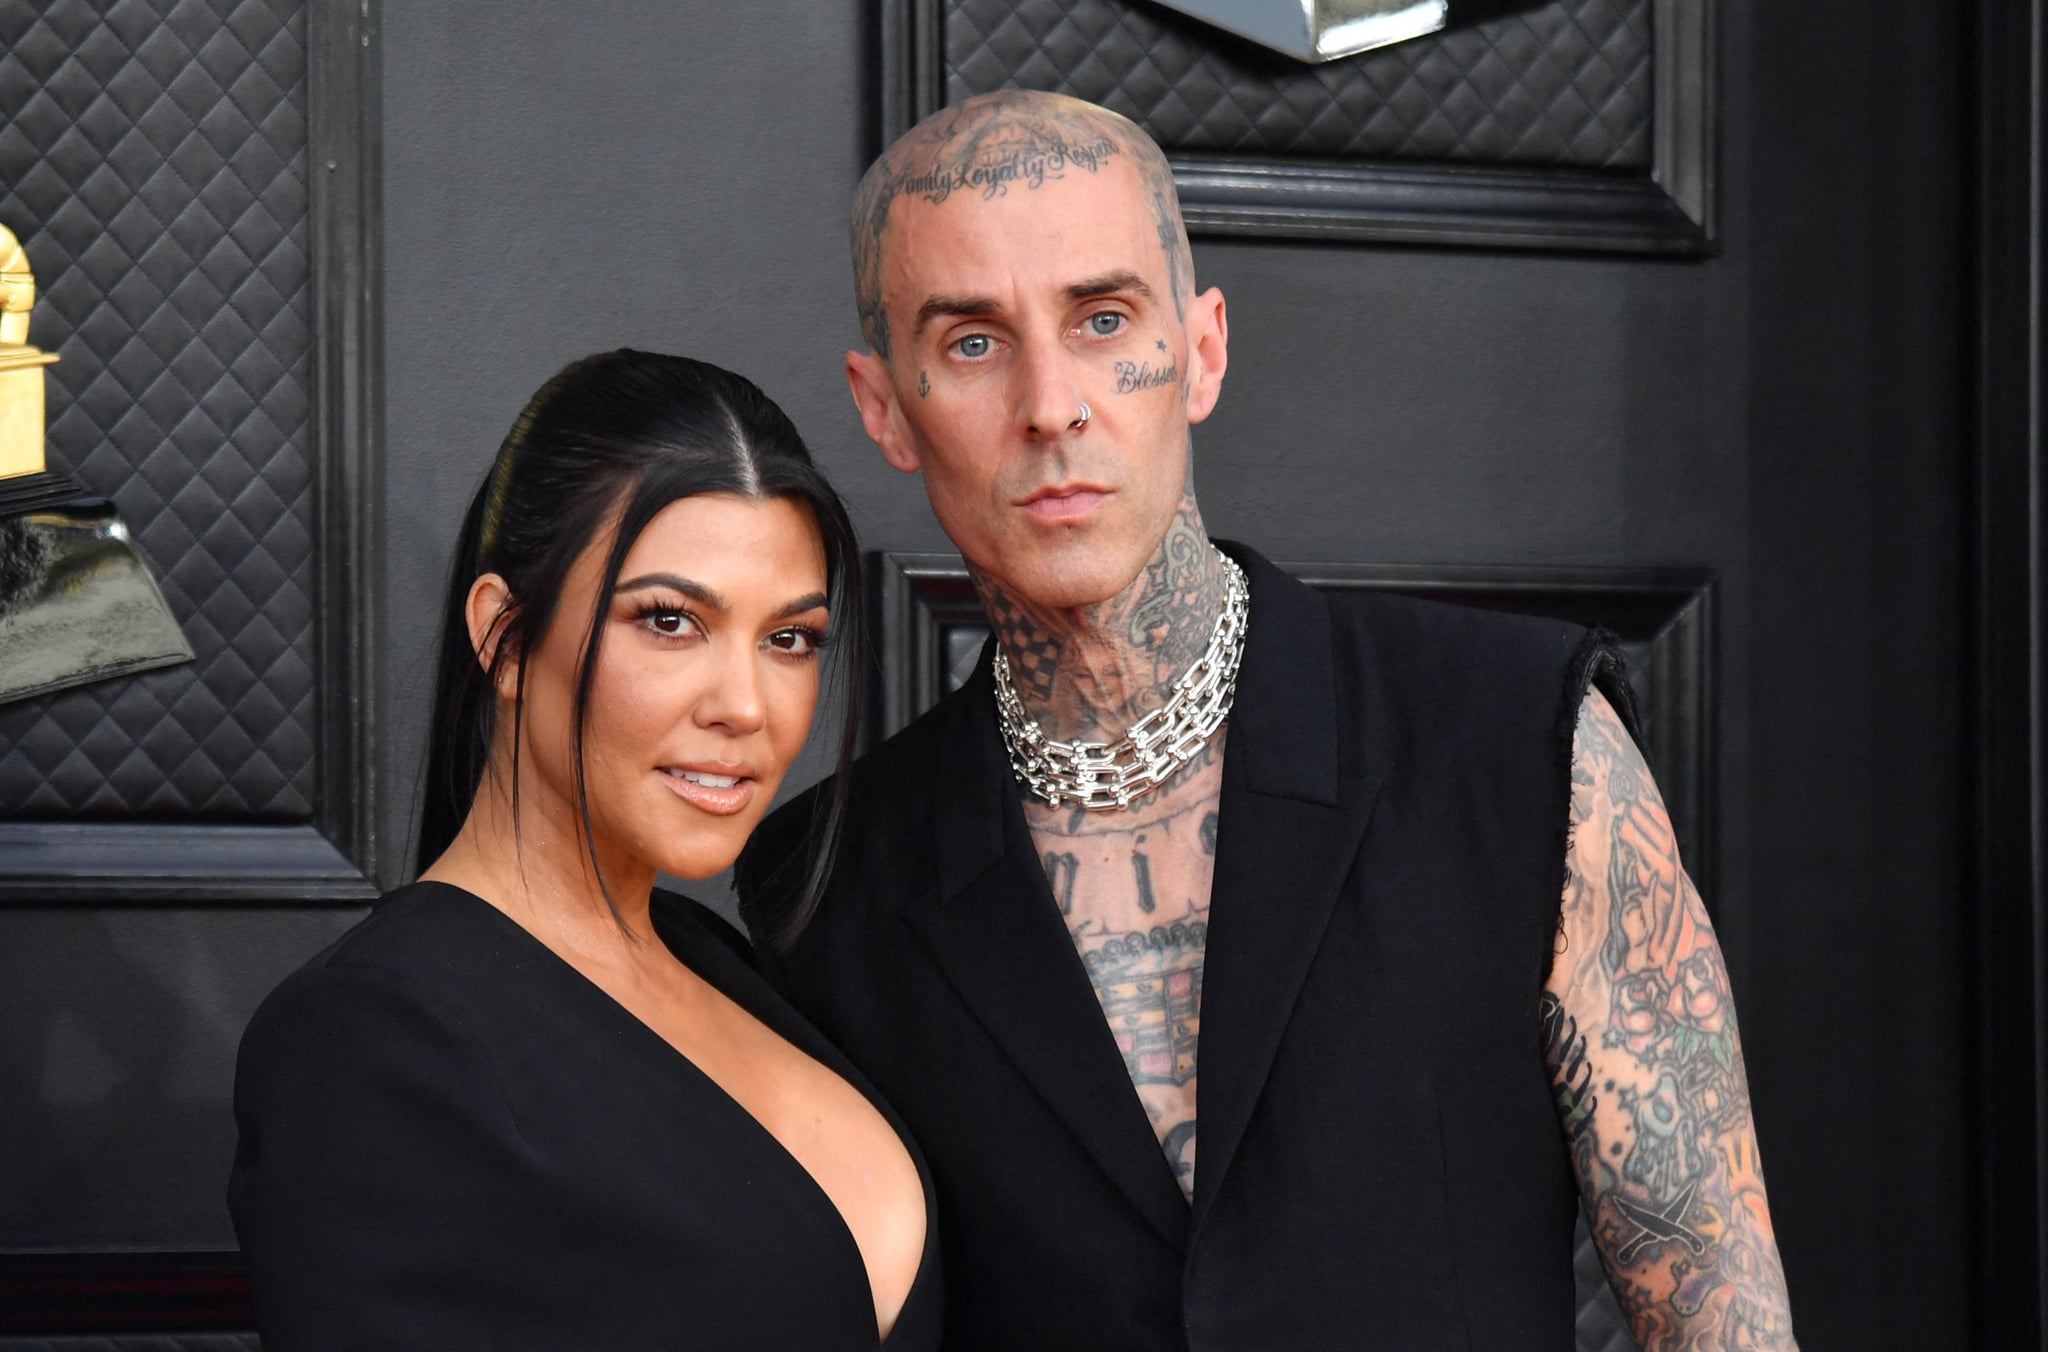 Kourtney Kardashian and musician Travis Barker arrive for the 64th Annual Grammy Awards at the MGM Grand Garden Arena in Las Vegas on April 3, 2022. (Photo by ANGELA  WEISS / AFP) (Photo by ANGELA  WEISS/AFP via Getty Images)